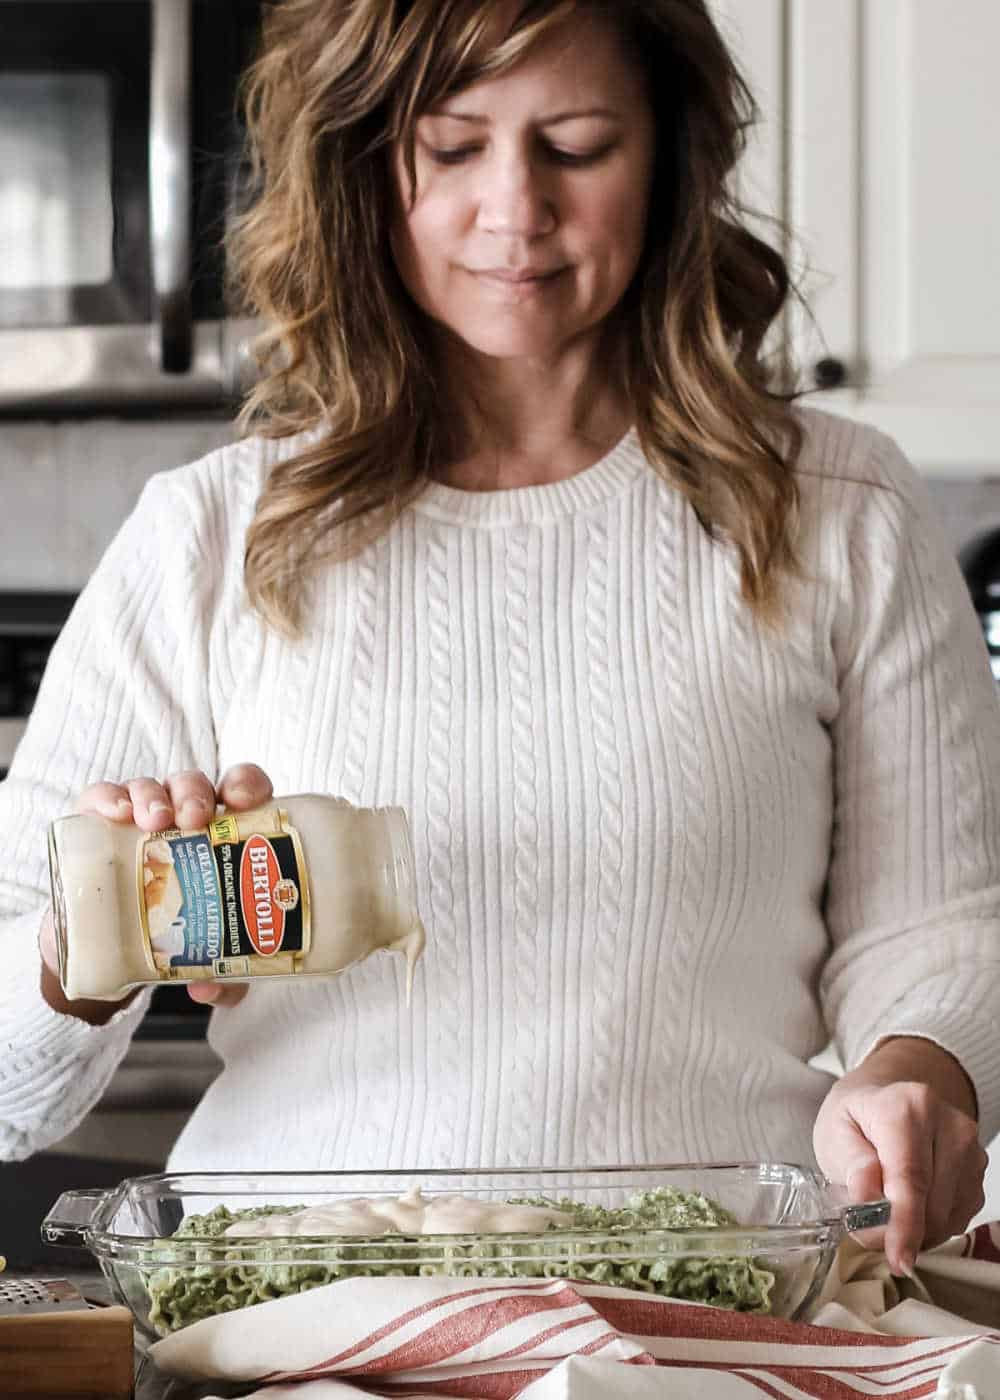 woman in kitchen pouring alfredo sauce over food in casserole dish.